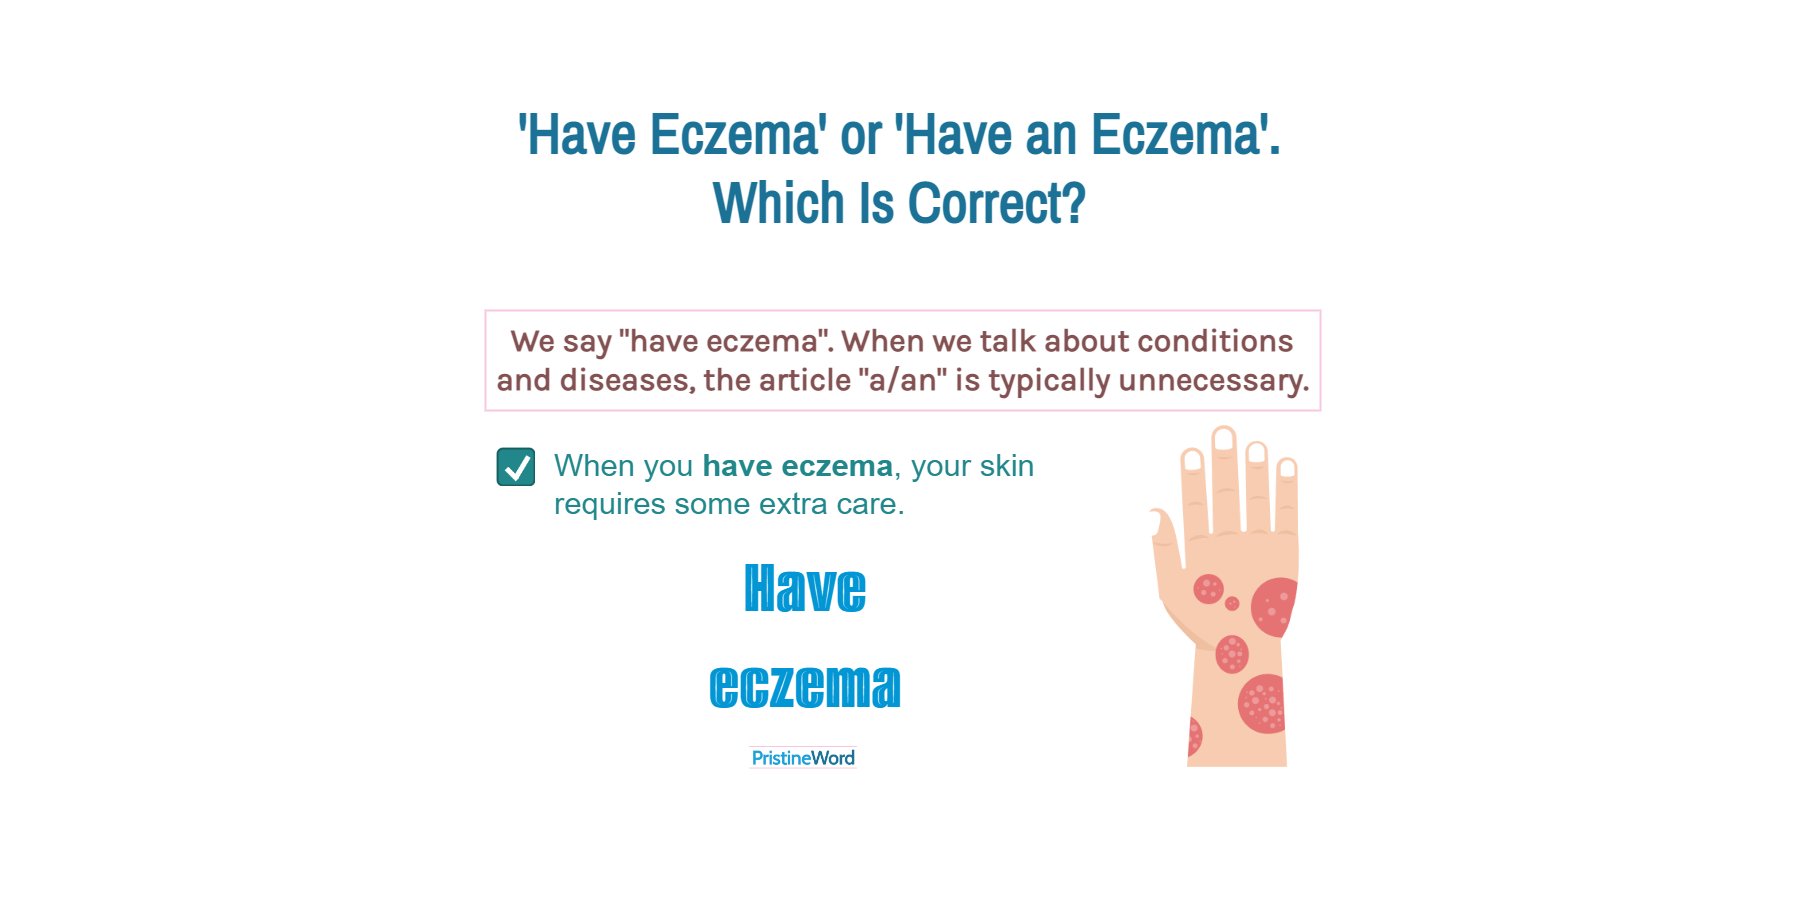 Have Eczema or Have an Eczema. Which Is Correct?